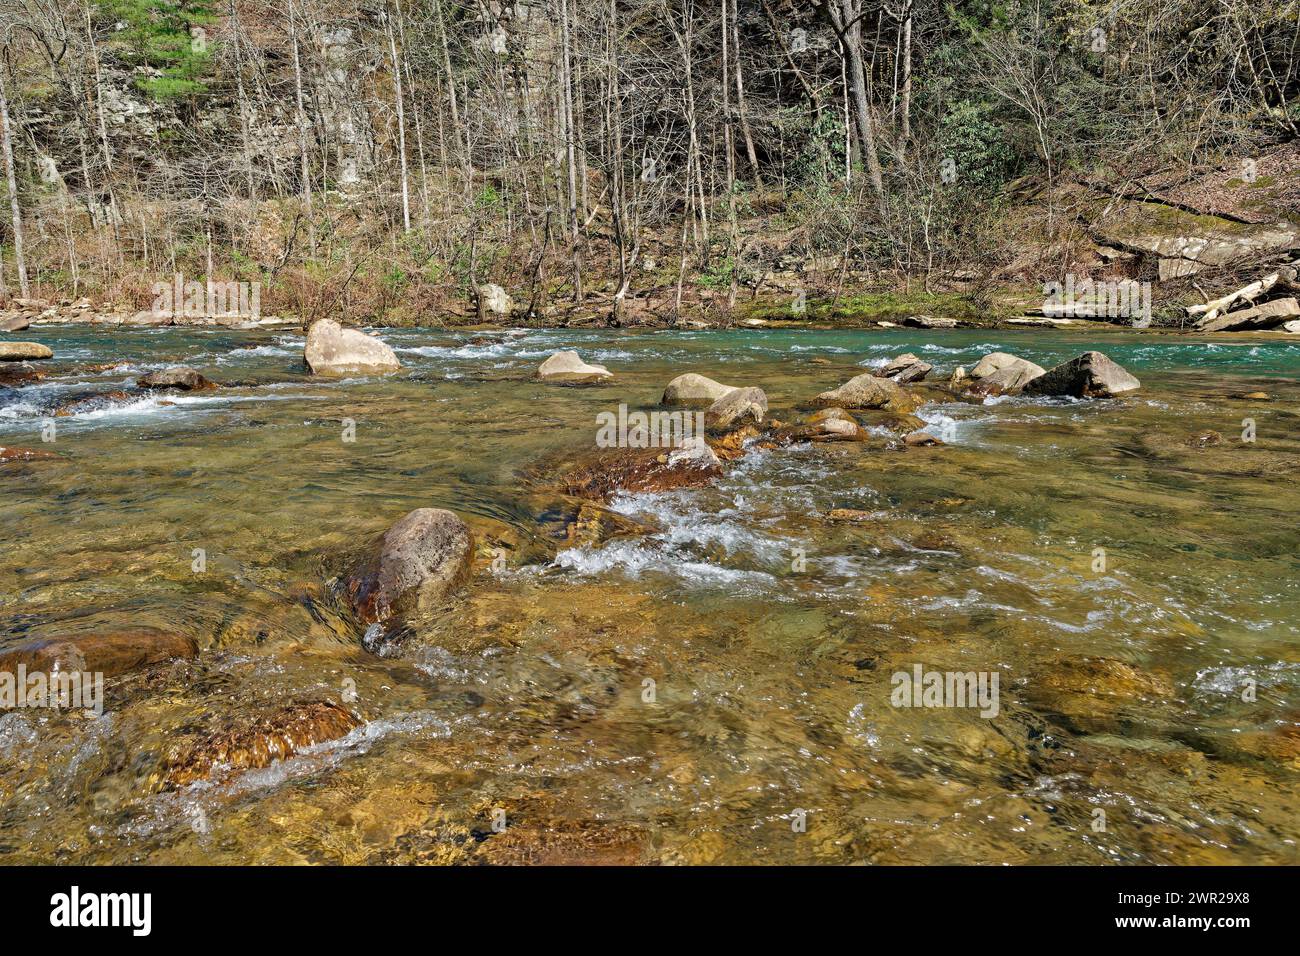 Fast flowing whitewater around the boulders in the crystal clear water of the Piney river in Tennessee closeup view with the woodlands in the backgrou Stock Photo